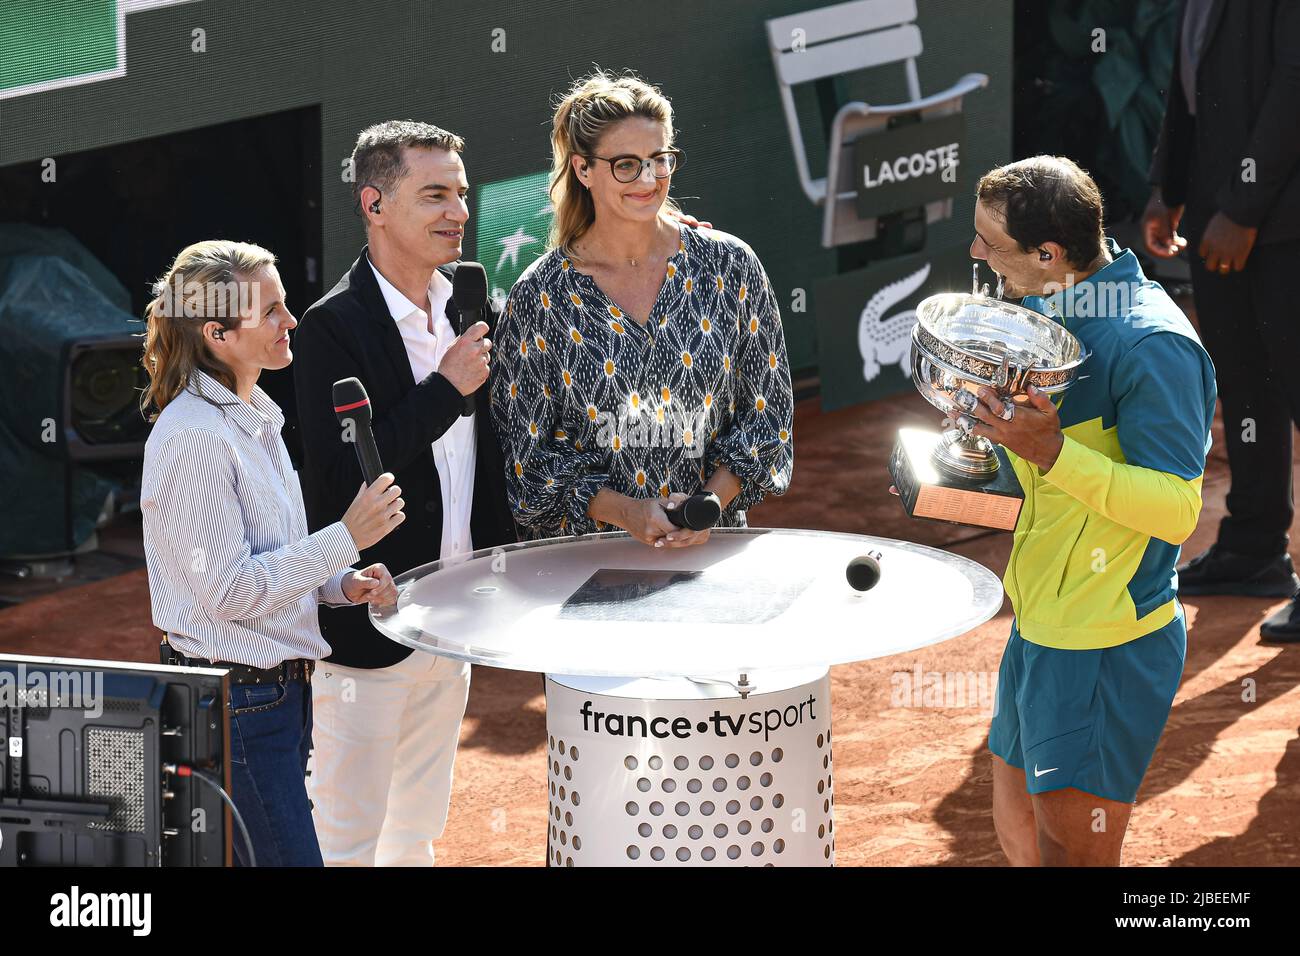 Paris, France - 05/06/2022, Rafael 'Rafa' Nadal of Spain with the trophy is interviewed by the French television channel 'France Televisions' ('France TV Sport', 'France 2') with Justine Henin, Laurent Luyat and Mary Pierce after the French Open final against Casper Ruud, Grand Slam tennis tournament on June 5, 2022 at Roland-Garros stadium in Paris, France - Photo: Victor Joly/DPPI/LiveMedia Stock Photo